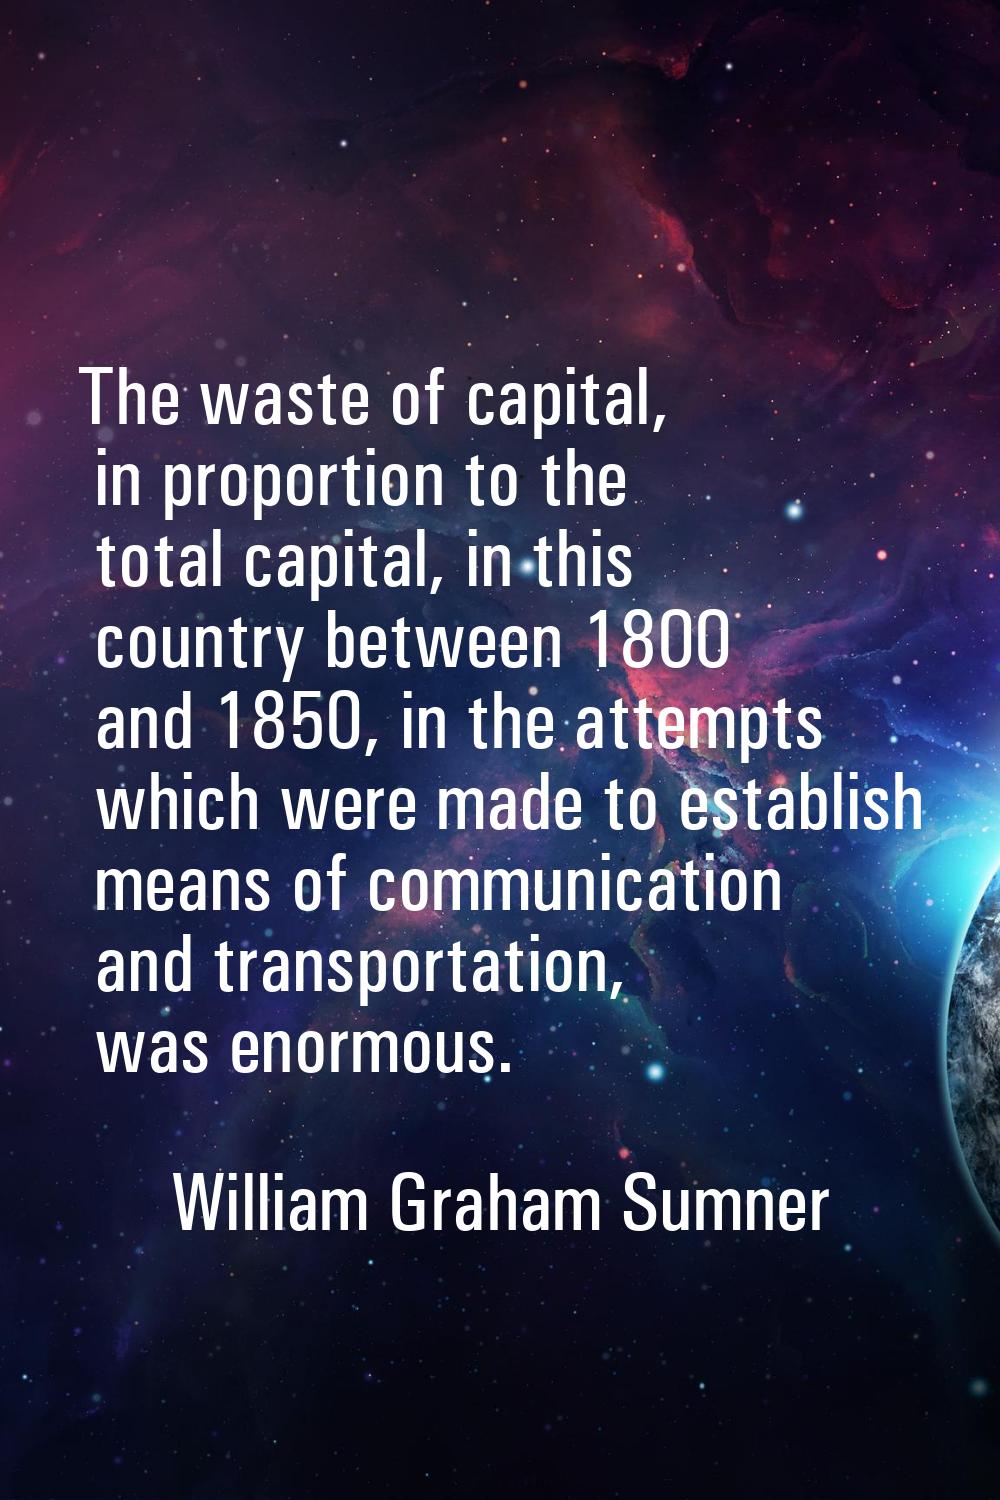 The waste of capital, in proportion to the total capital, in this country between 1800 and 1850, in